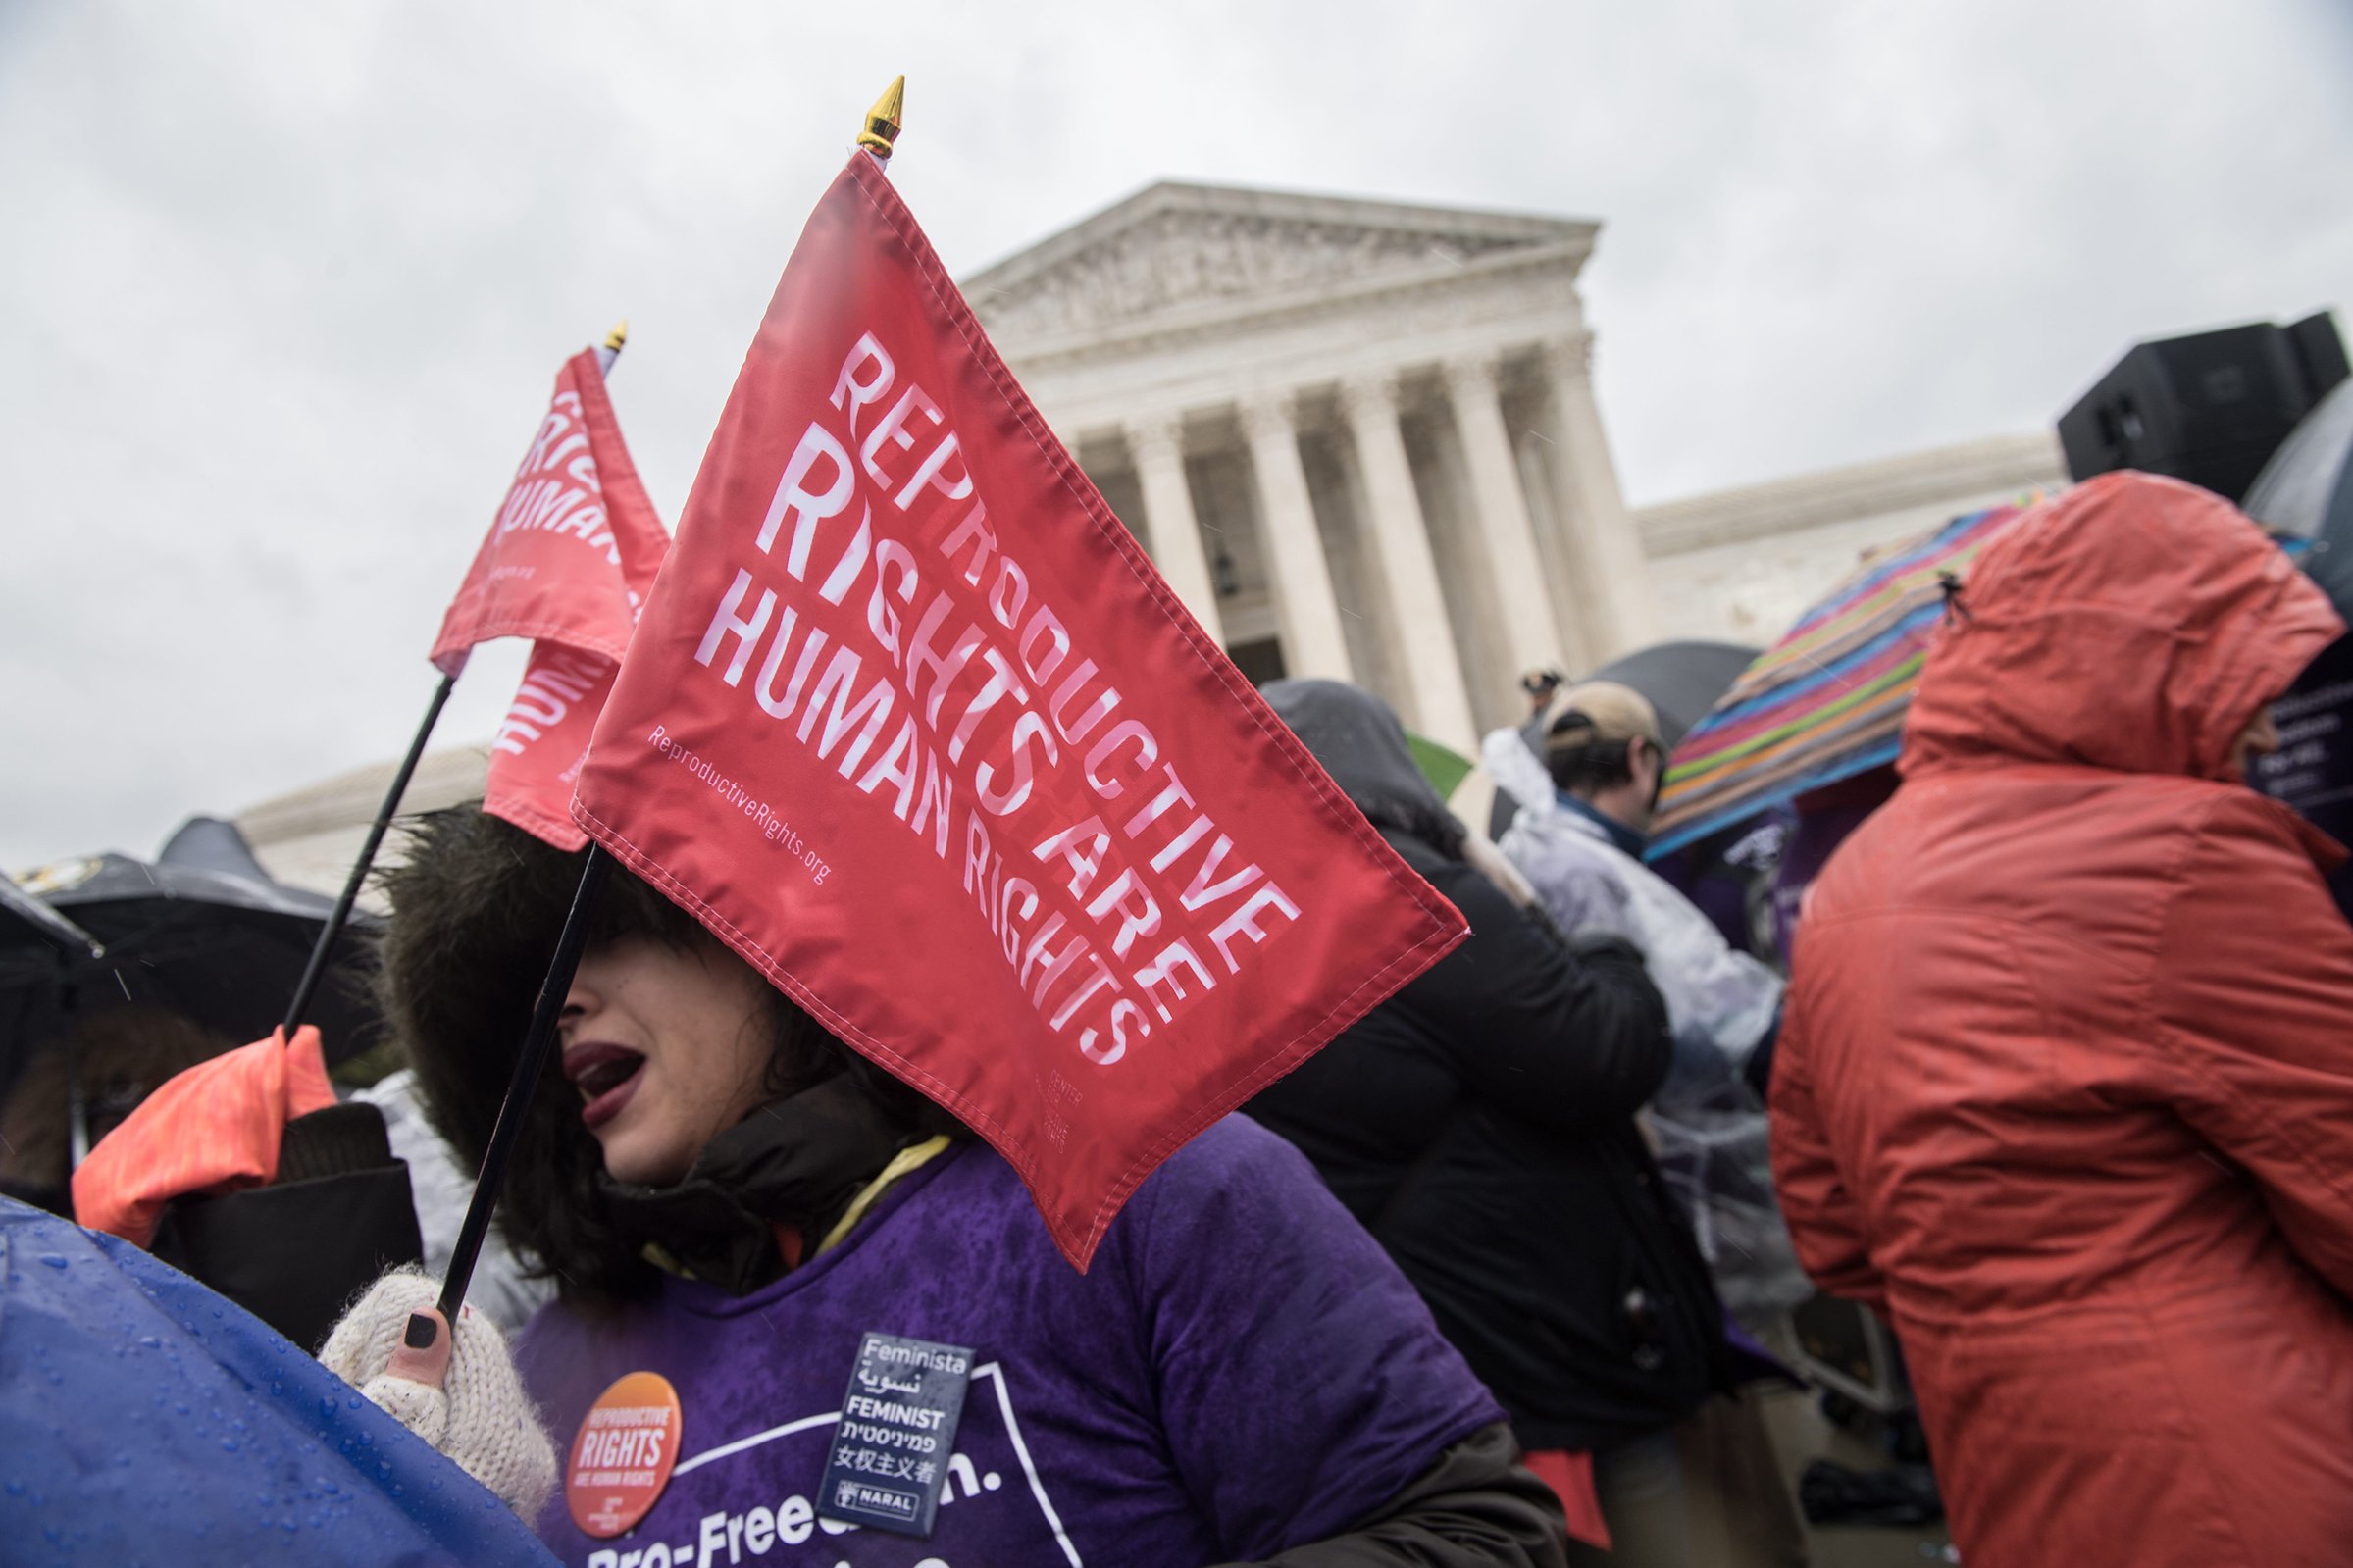 Pro-choice activists demonstrate in front of the Supreme Court in Washington, on March 20, 2018.